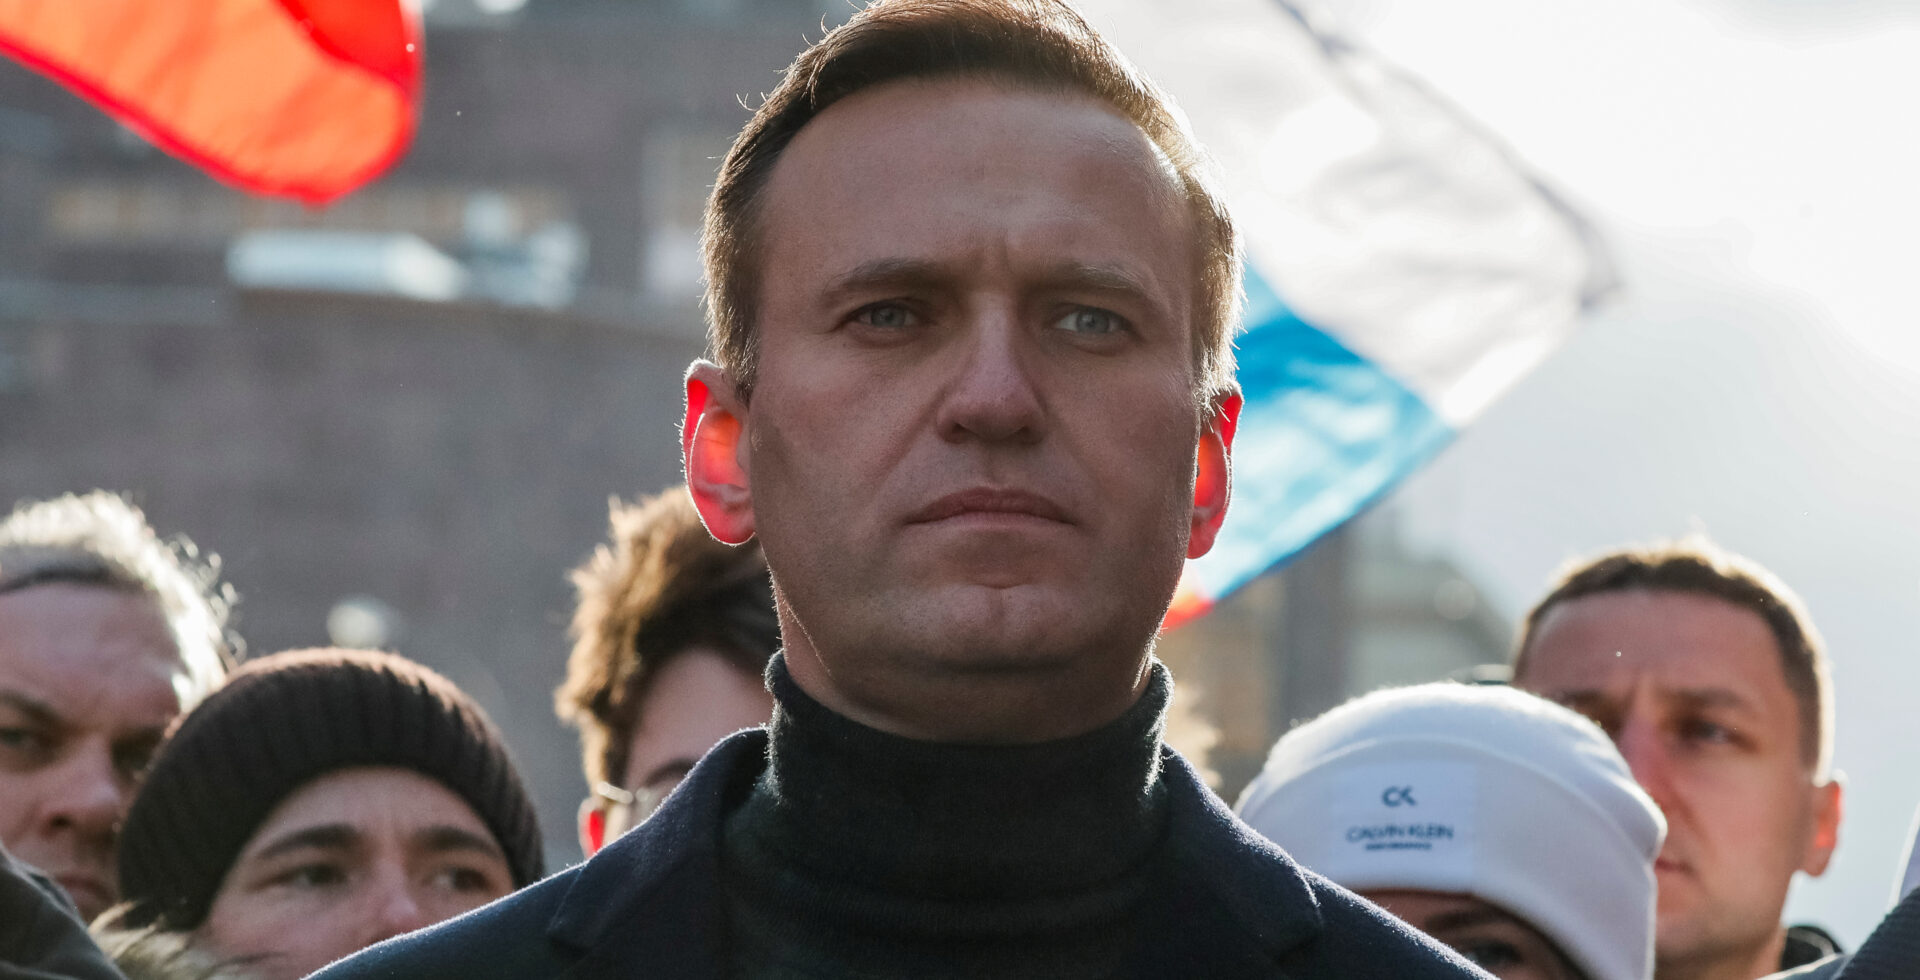 Russian opposition politician Alexei Navalny takes part in a rally